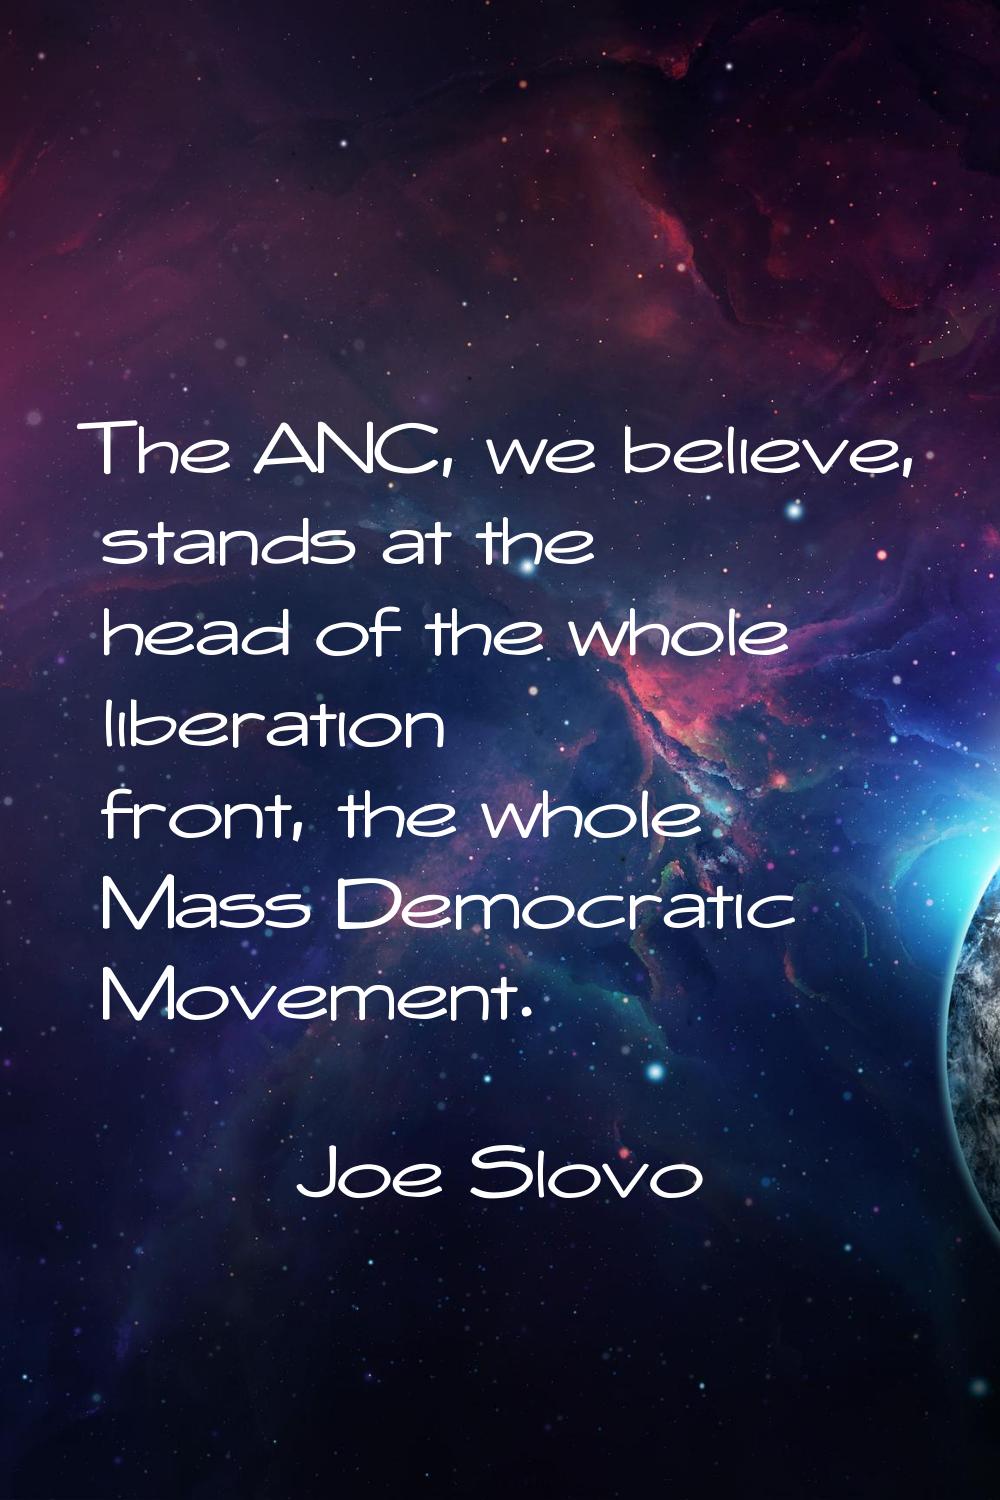 The ANC, we believe, stands at the head of the whole liberation front, the whole Mass Democratic Mo